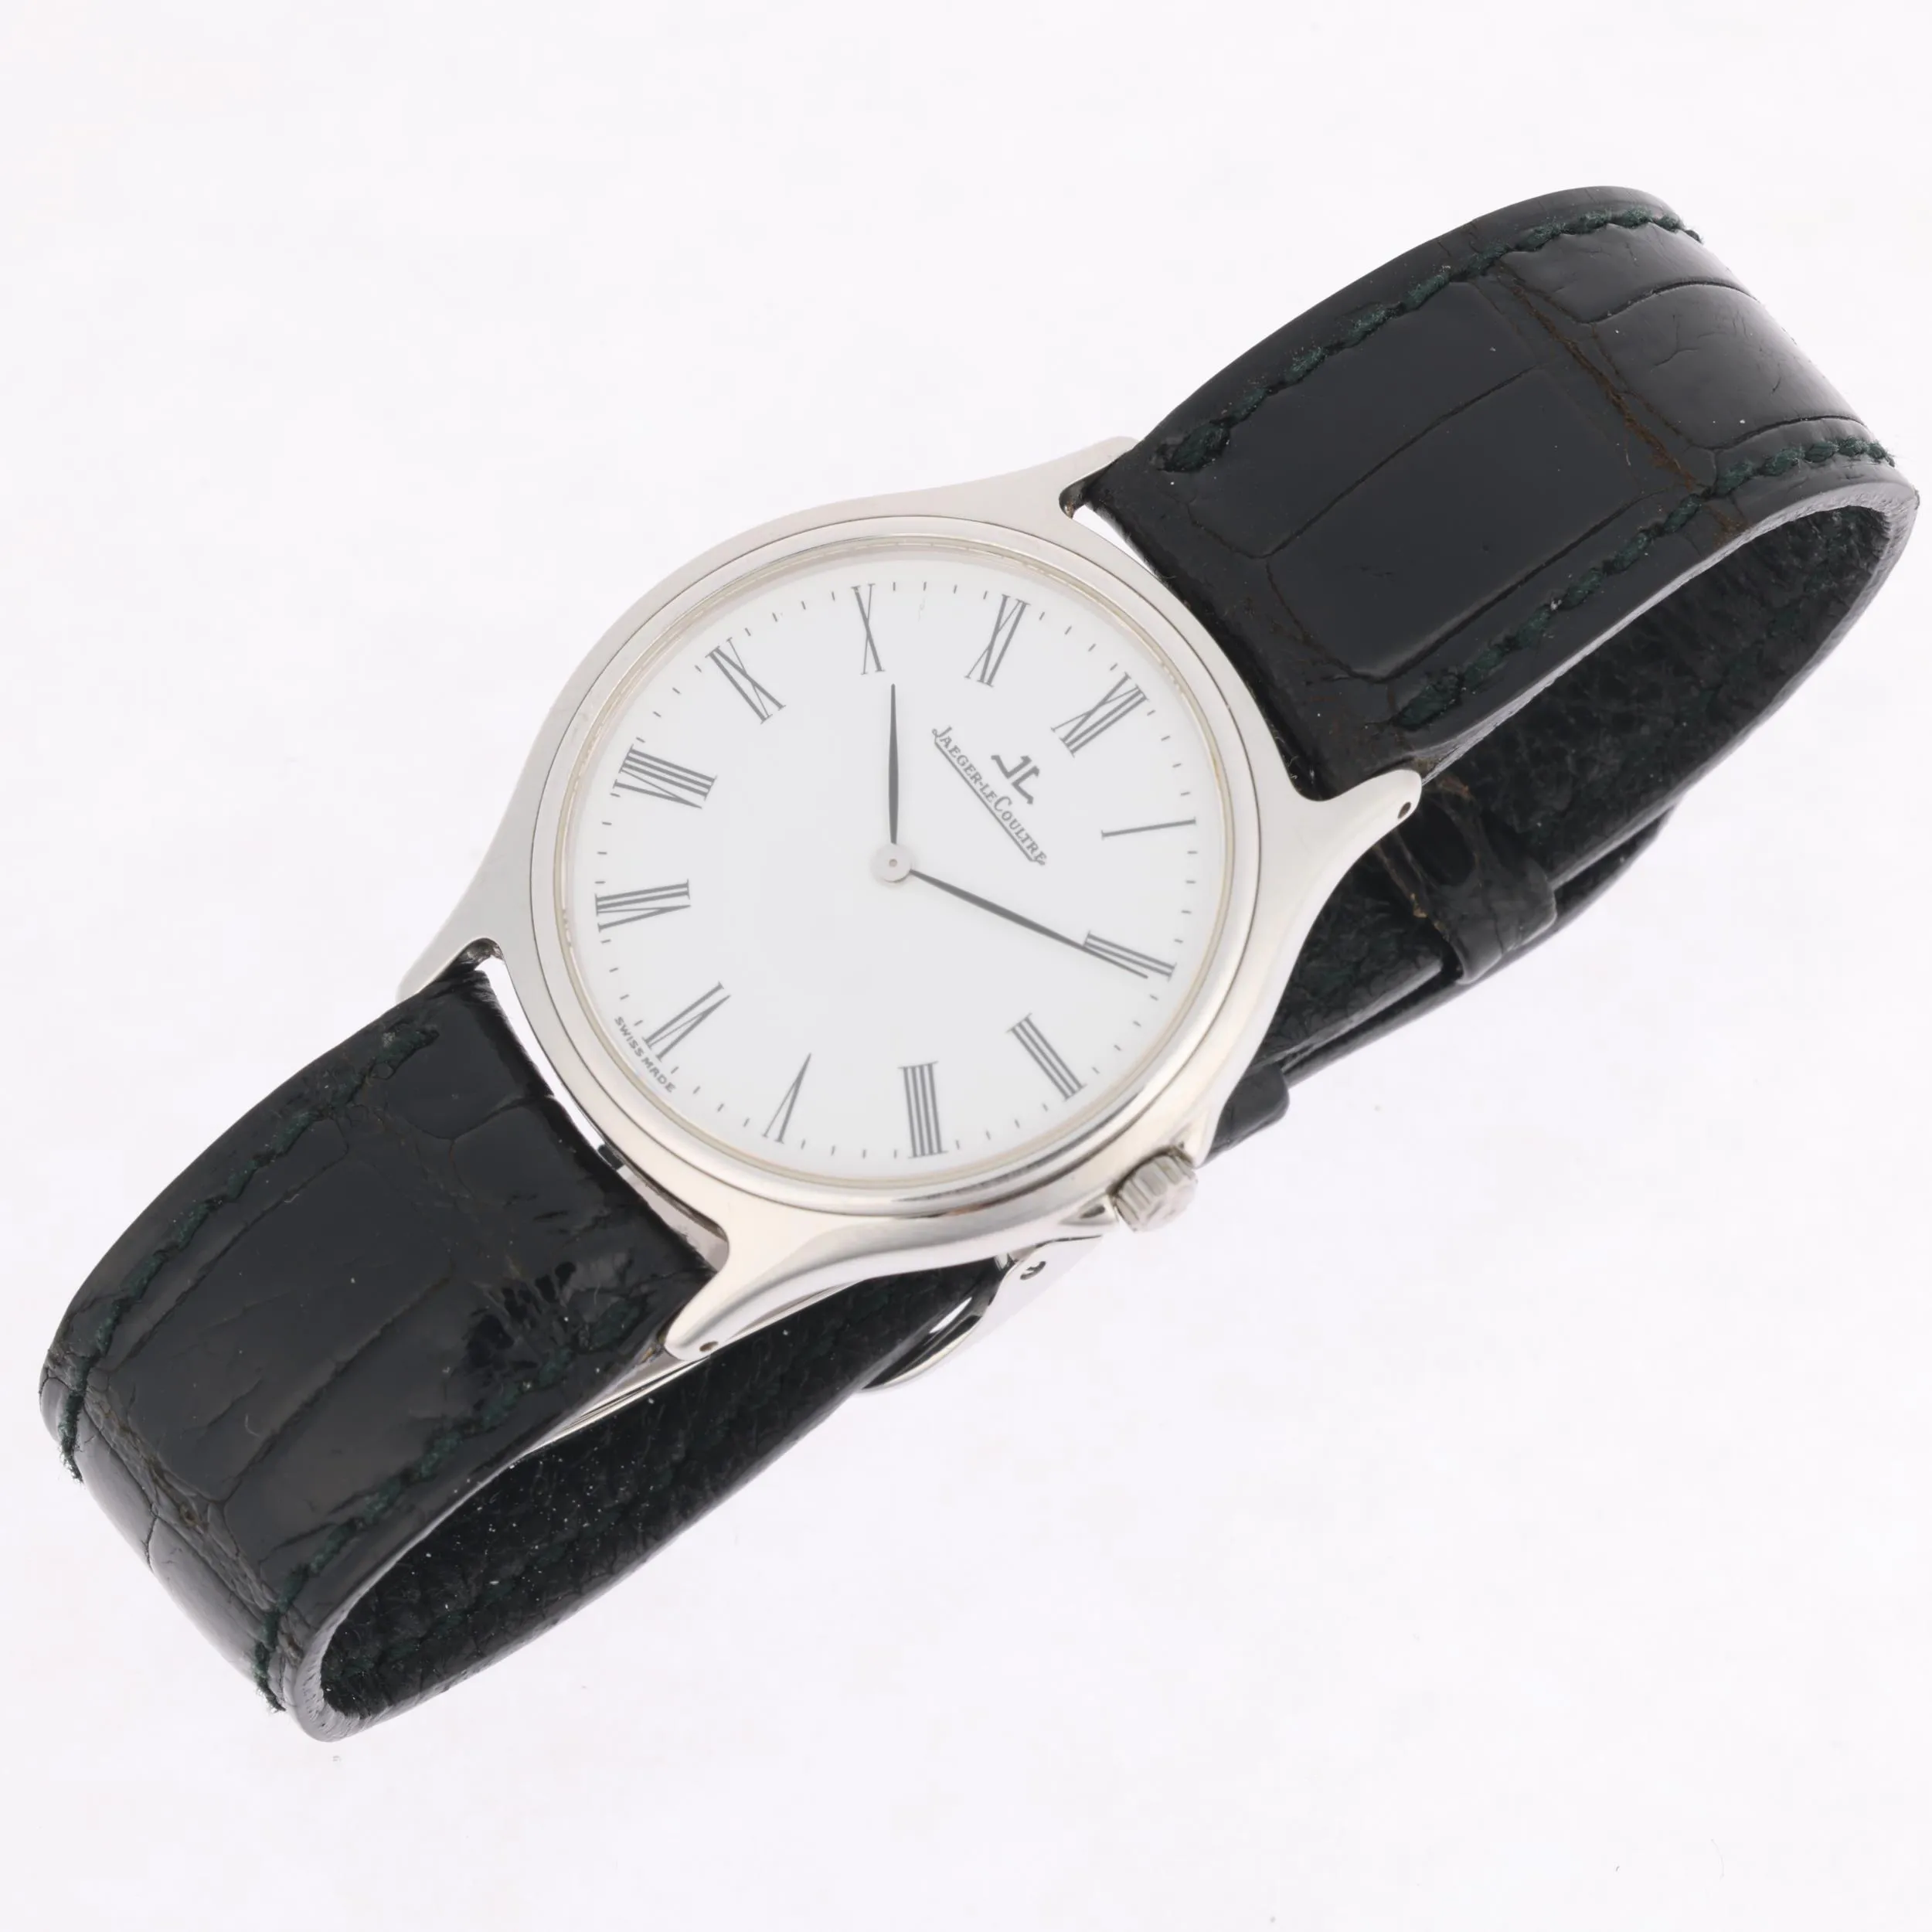 Jaeger-LeCoultre Heraion 112.8.08 34mm Stainless steel White 1